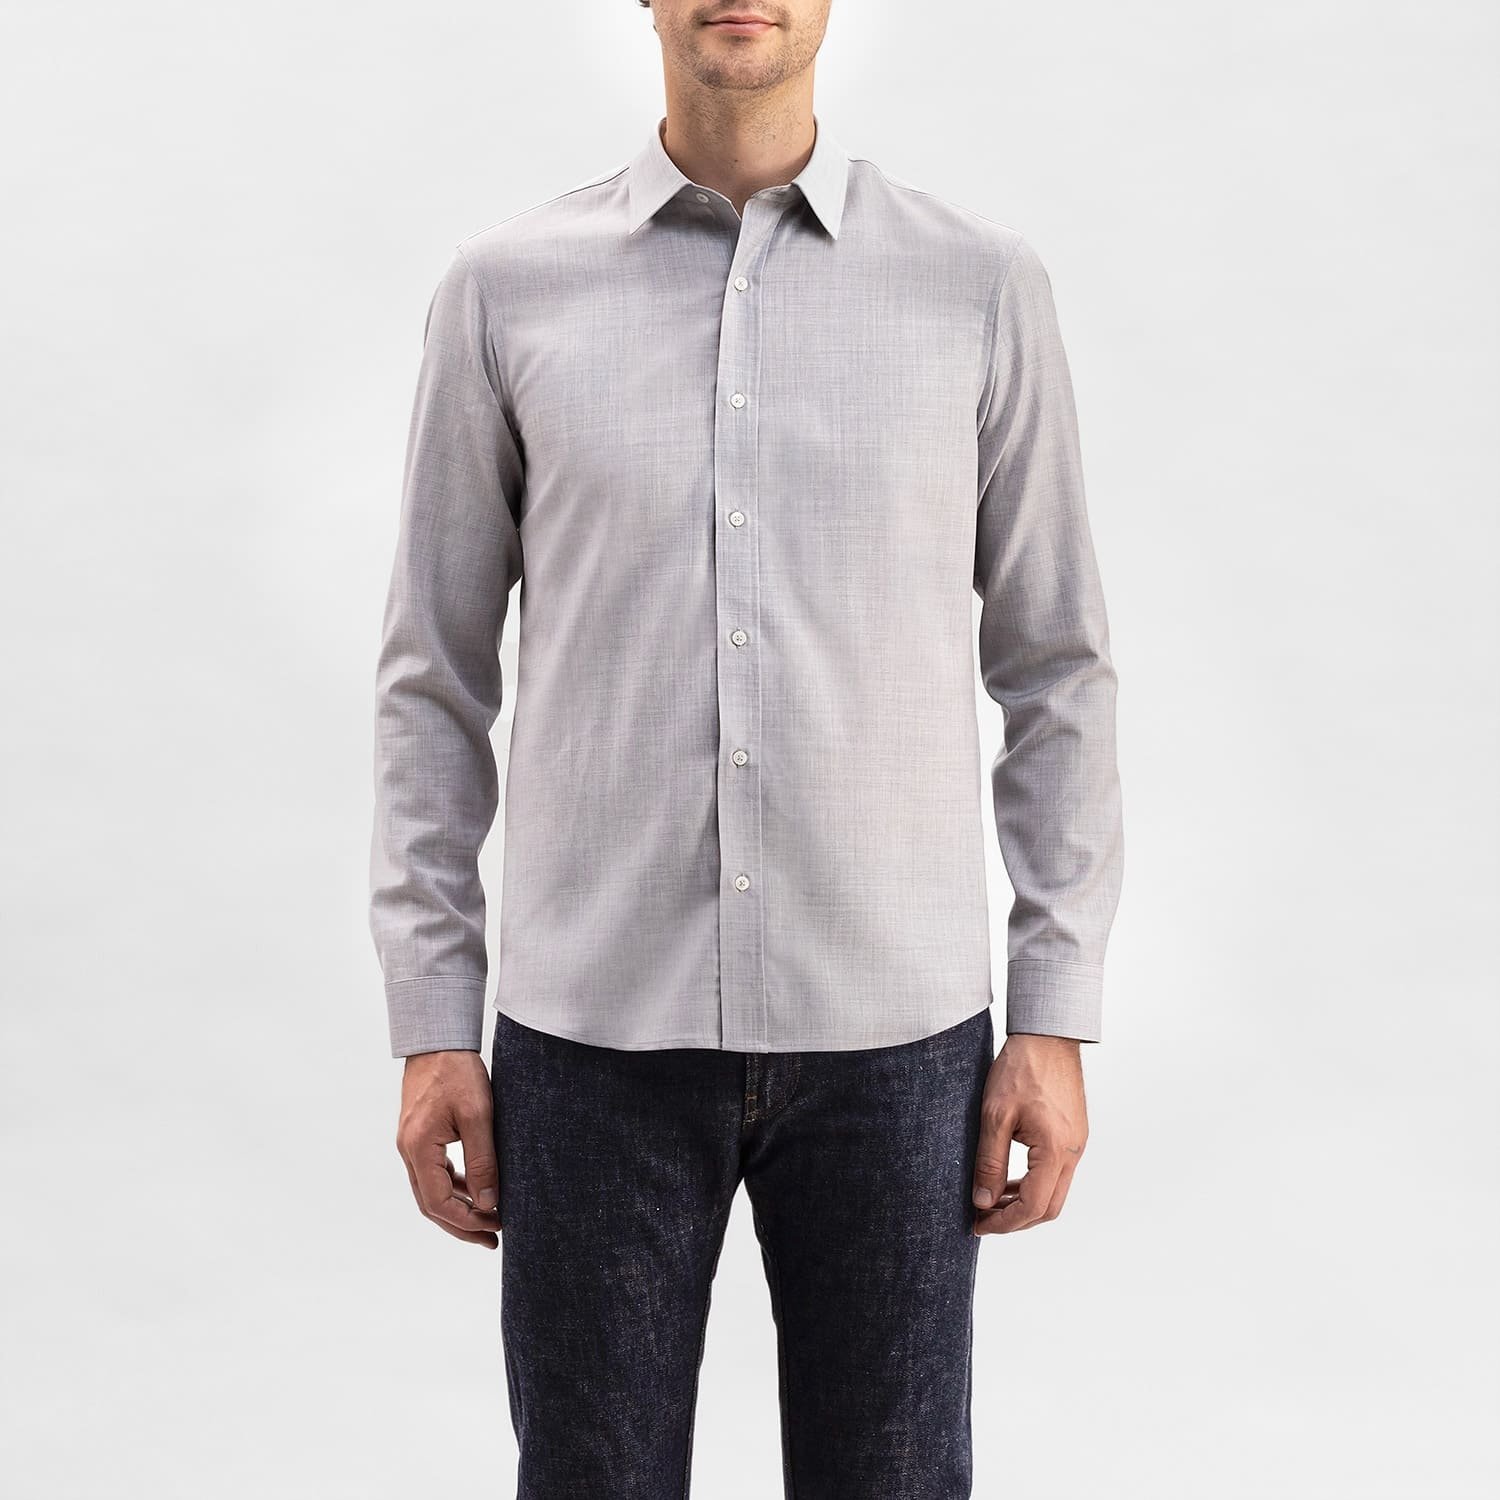 Merino Wool Light Grey - Shirt made in USA from Portuguese fabric